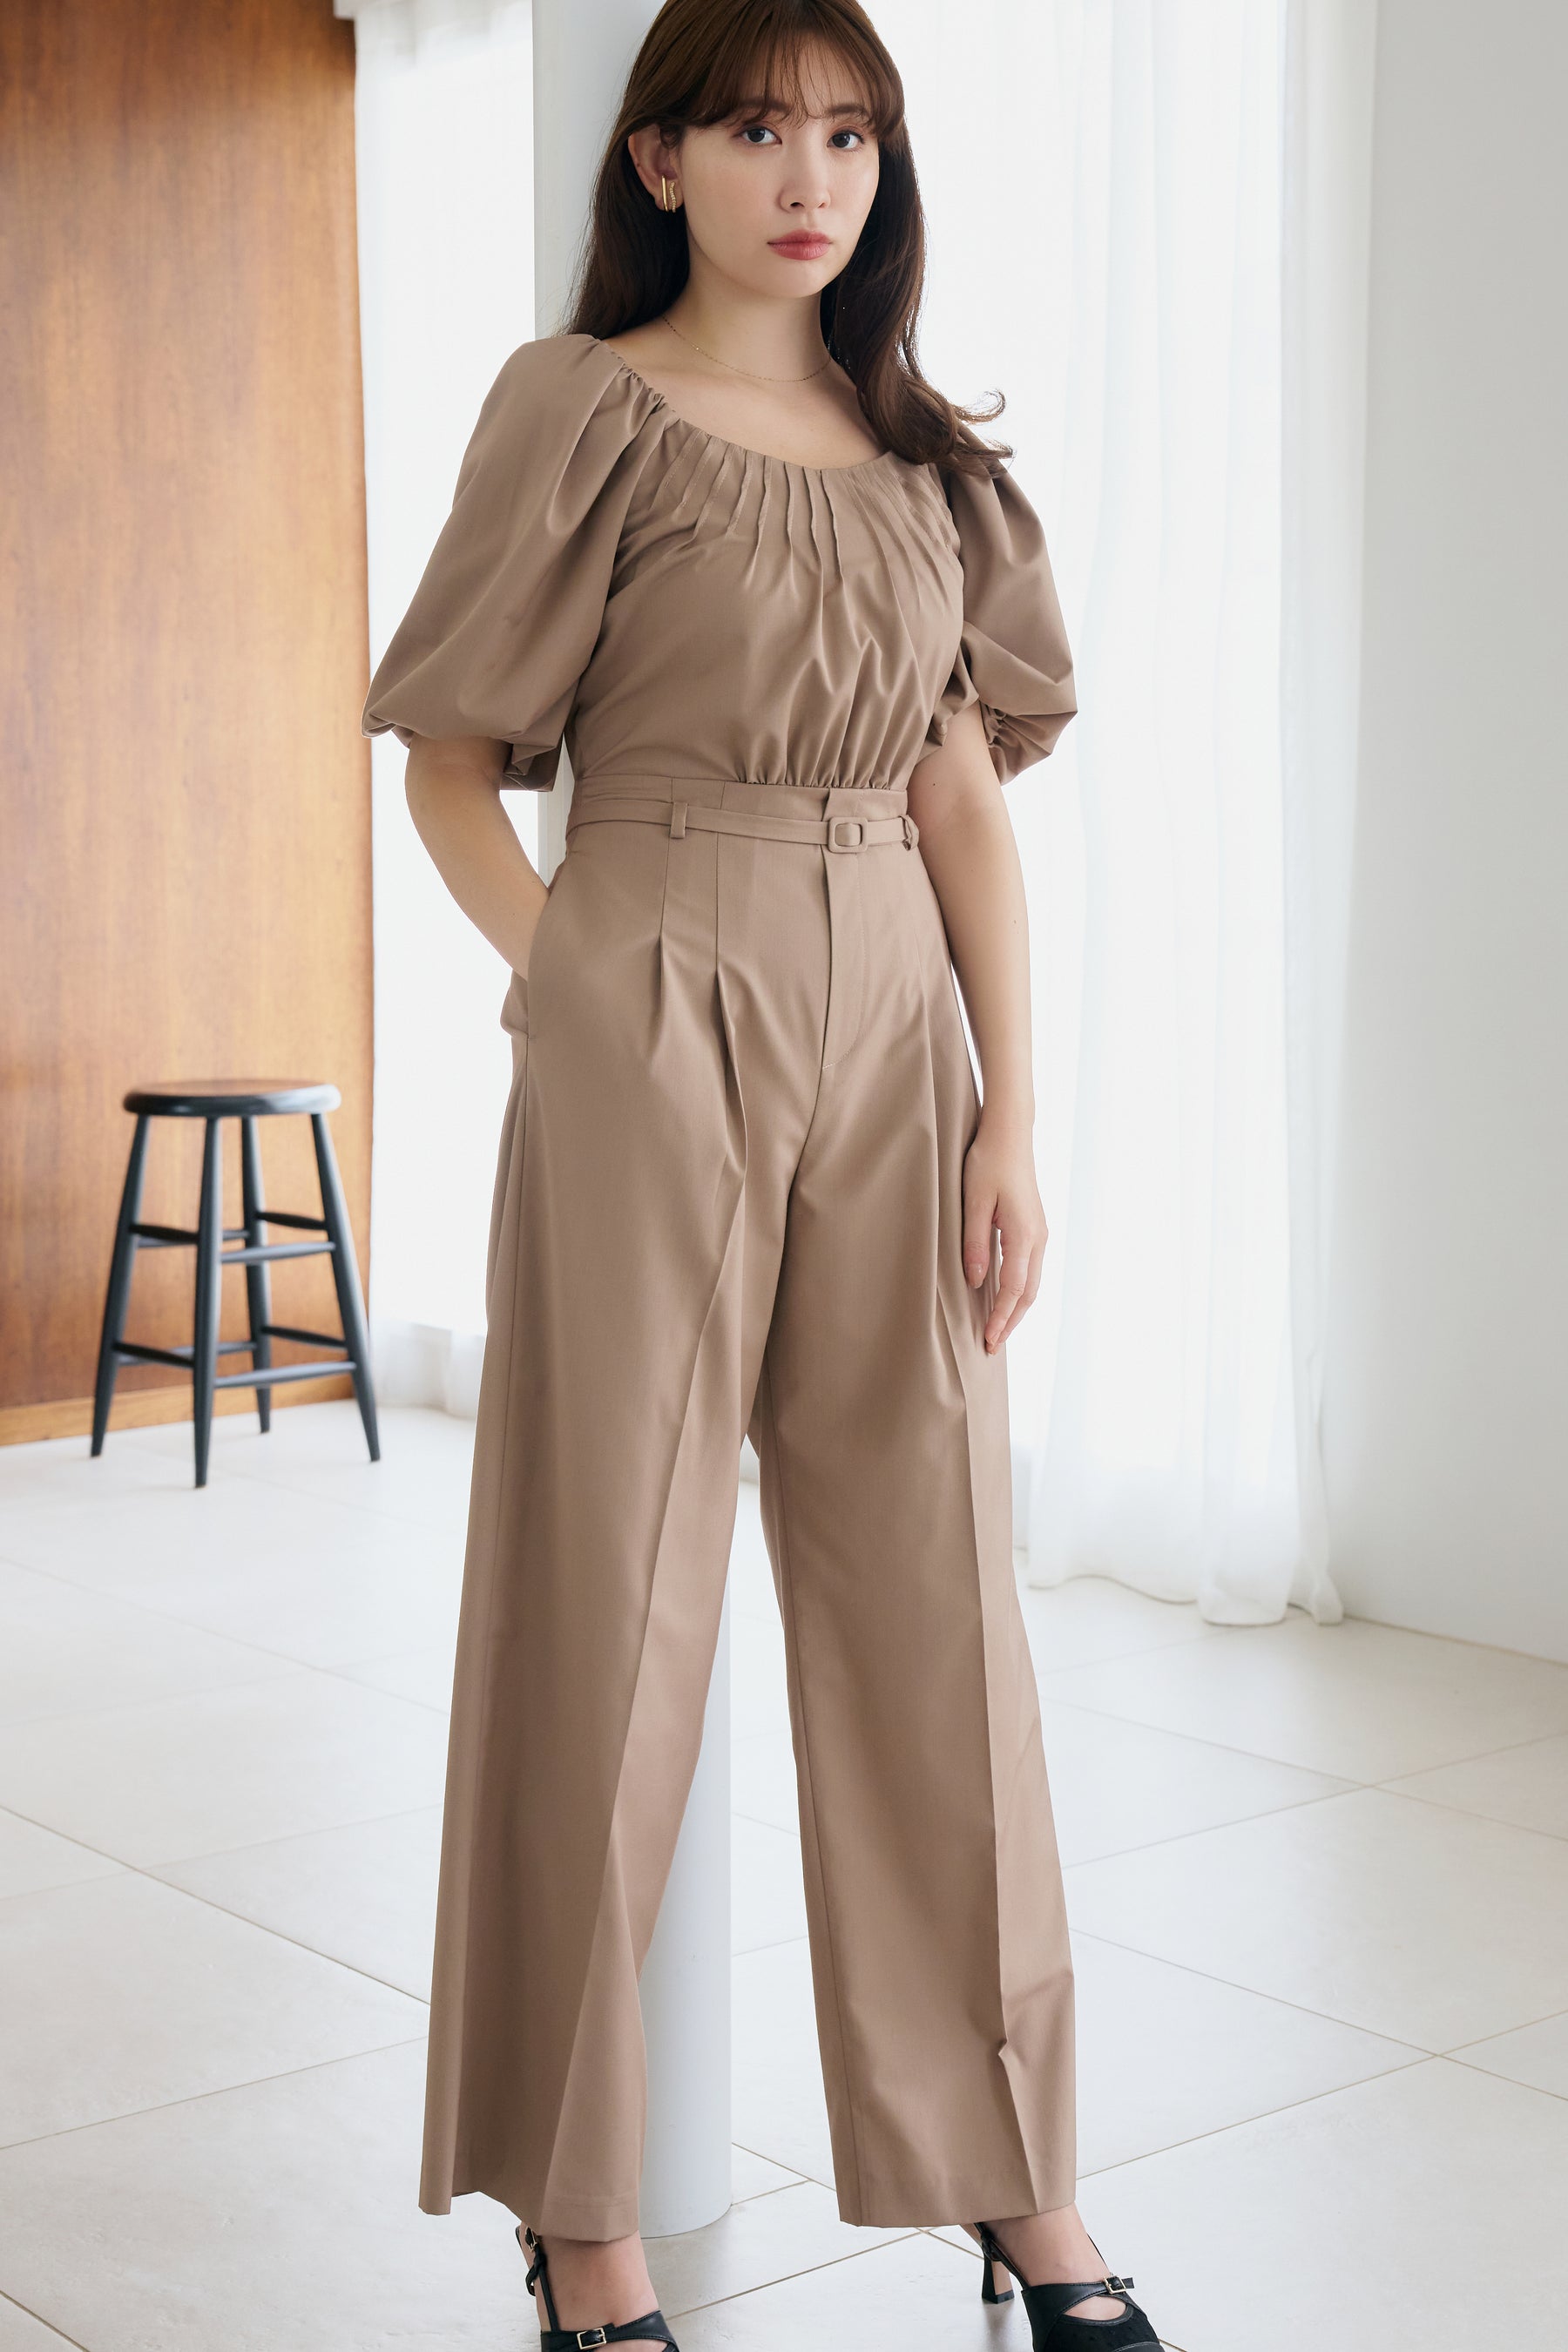 Roches Open Back Jumpsuit